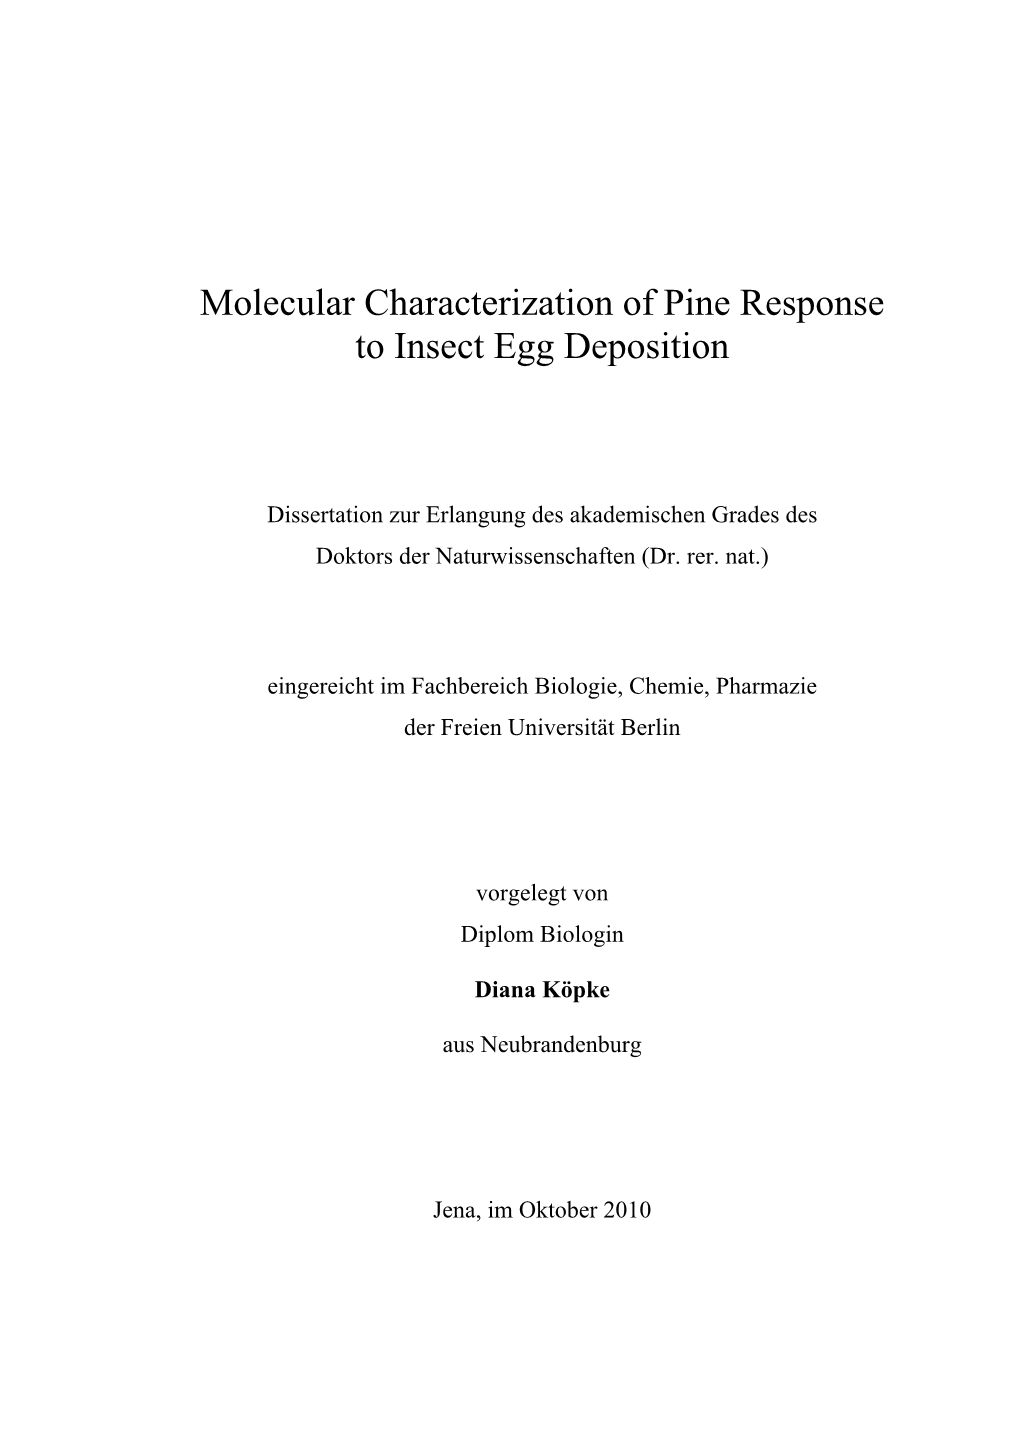 Molecular Characterization of Pine Response to Insect Egg Deposition